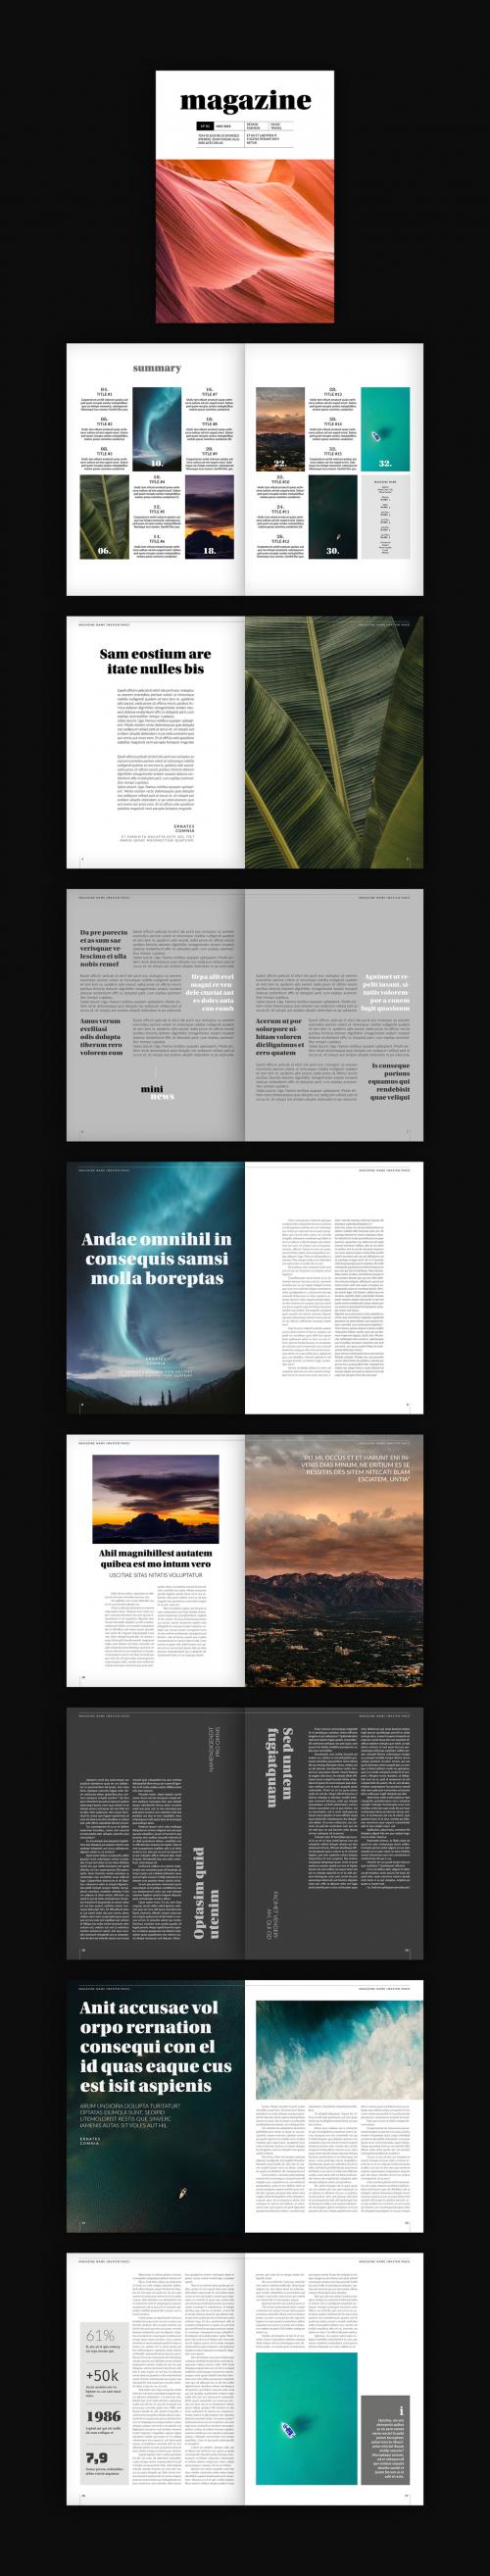 Adobe Stock - Magazine Layout with Gray Accents - 228387120